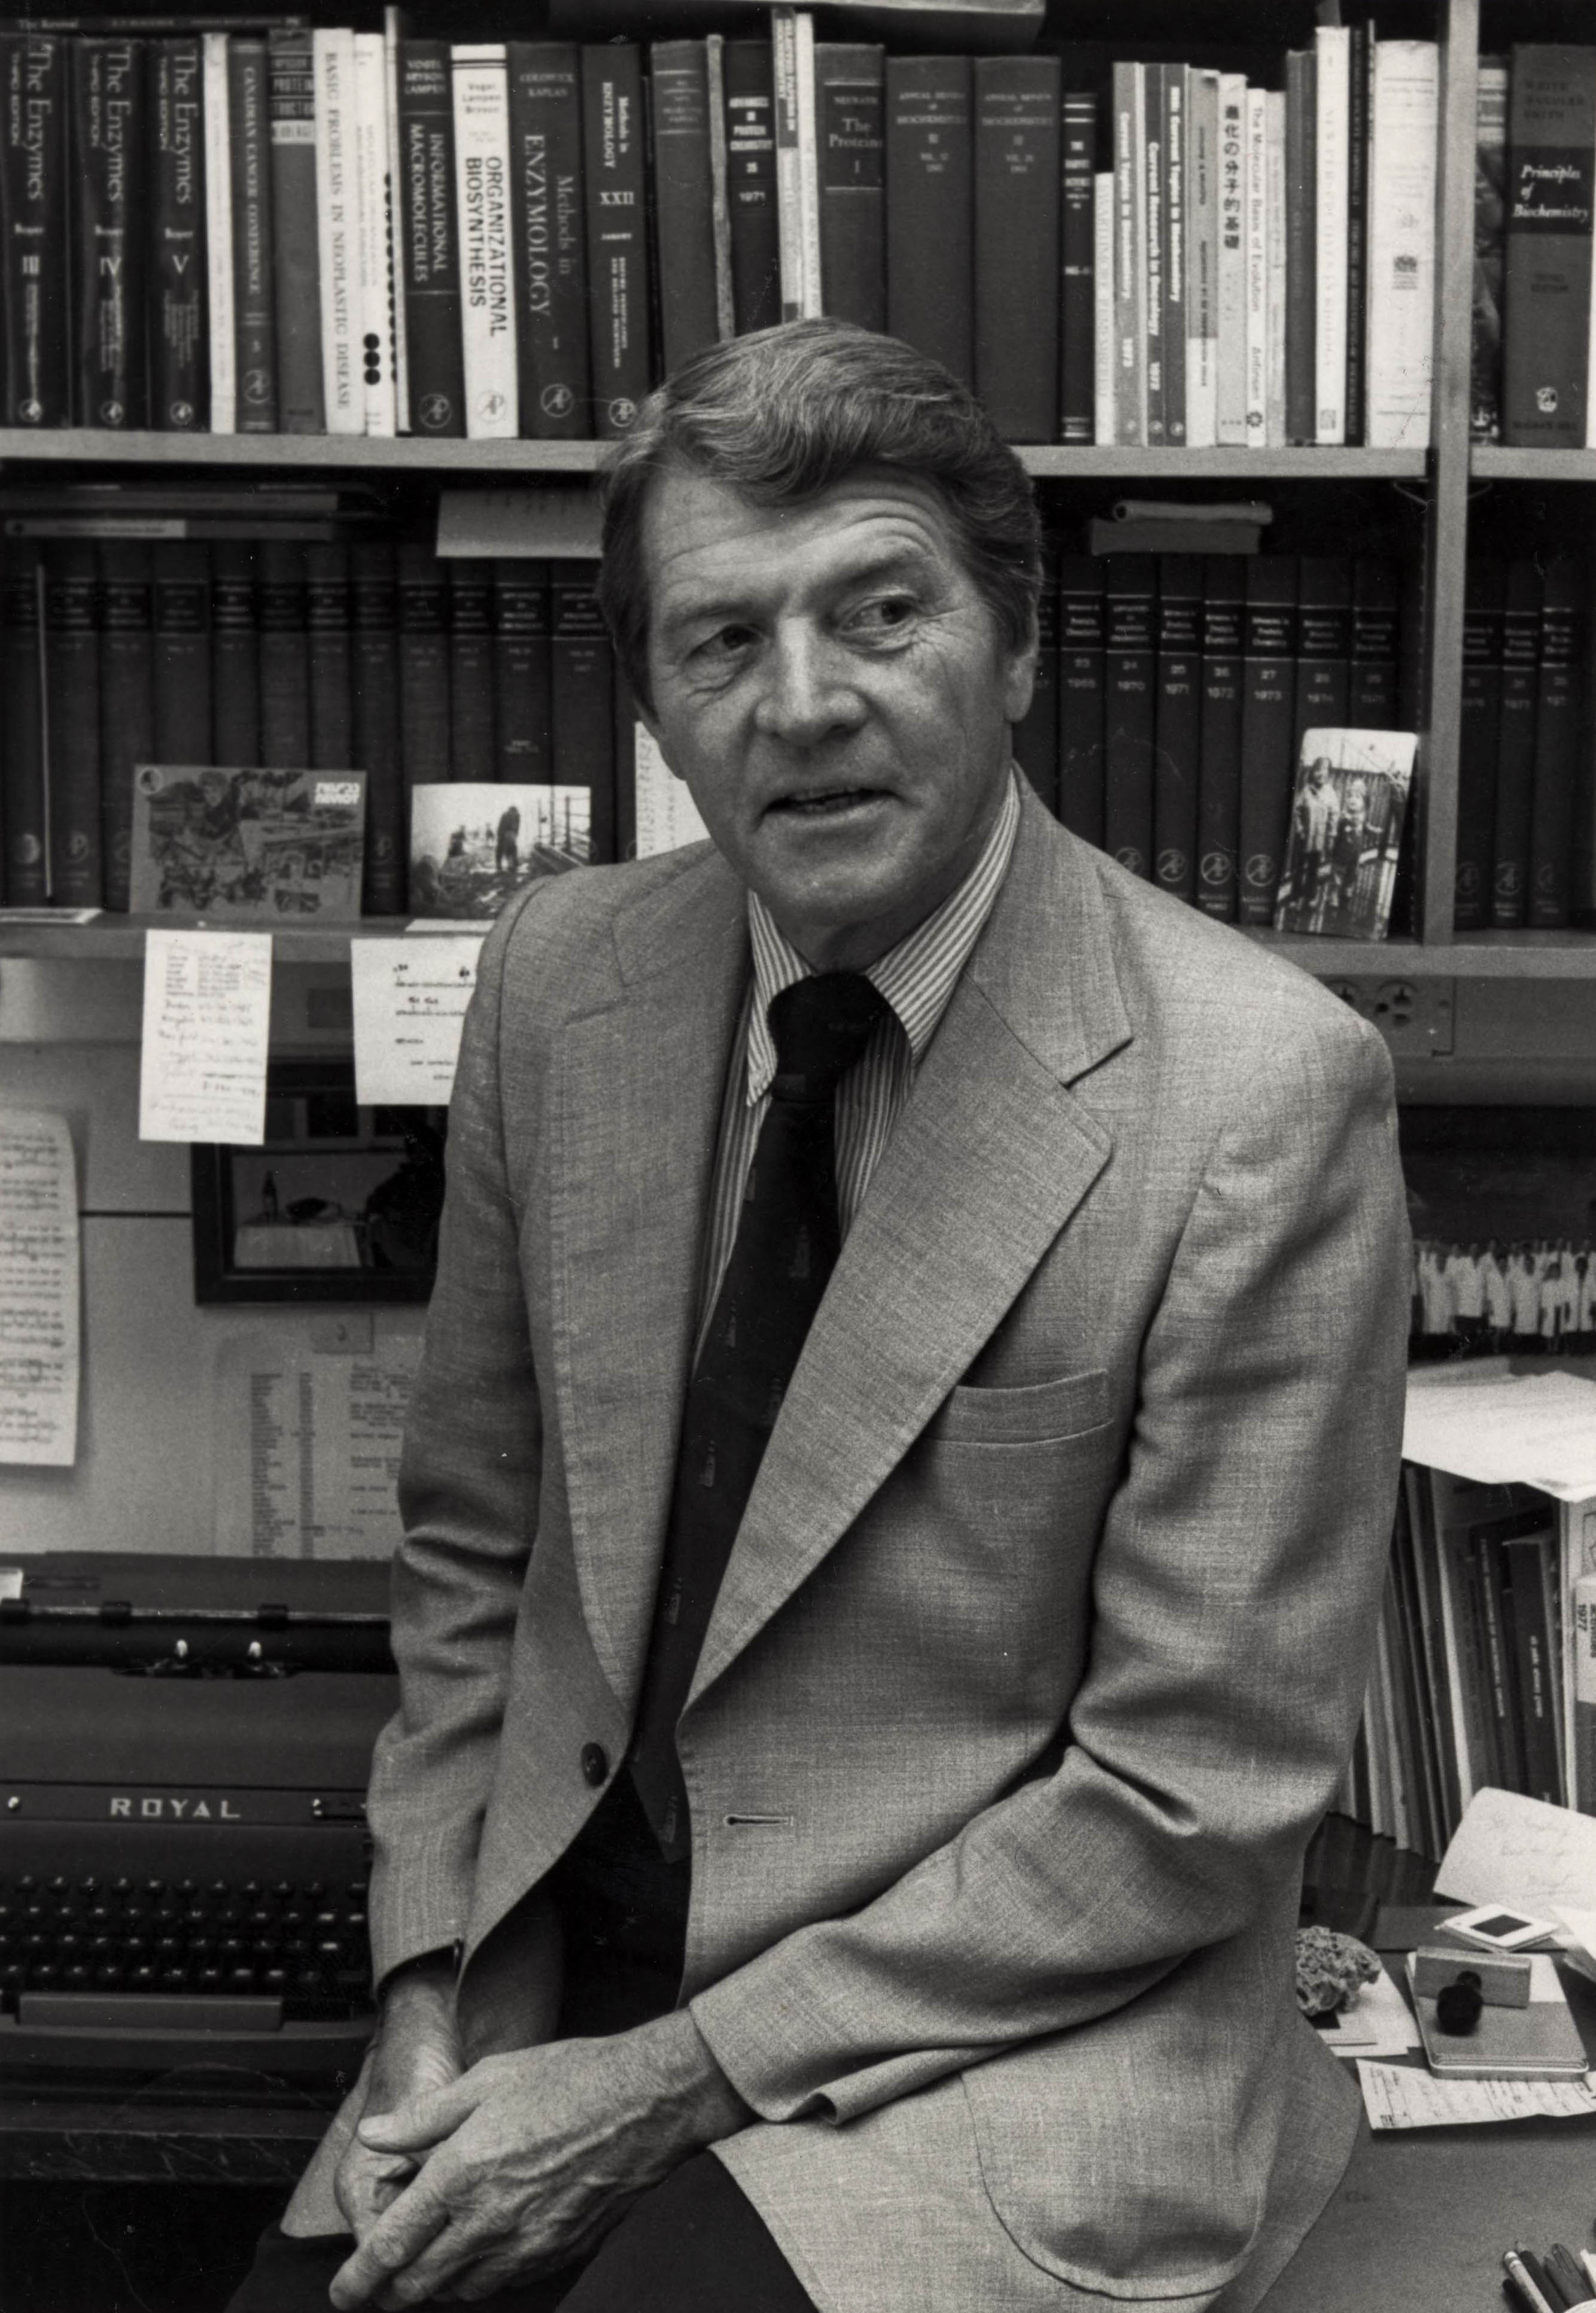 Anfinsen seated in front of bookshelves and a typewriter